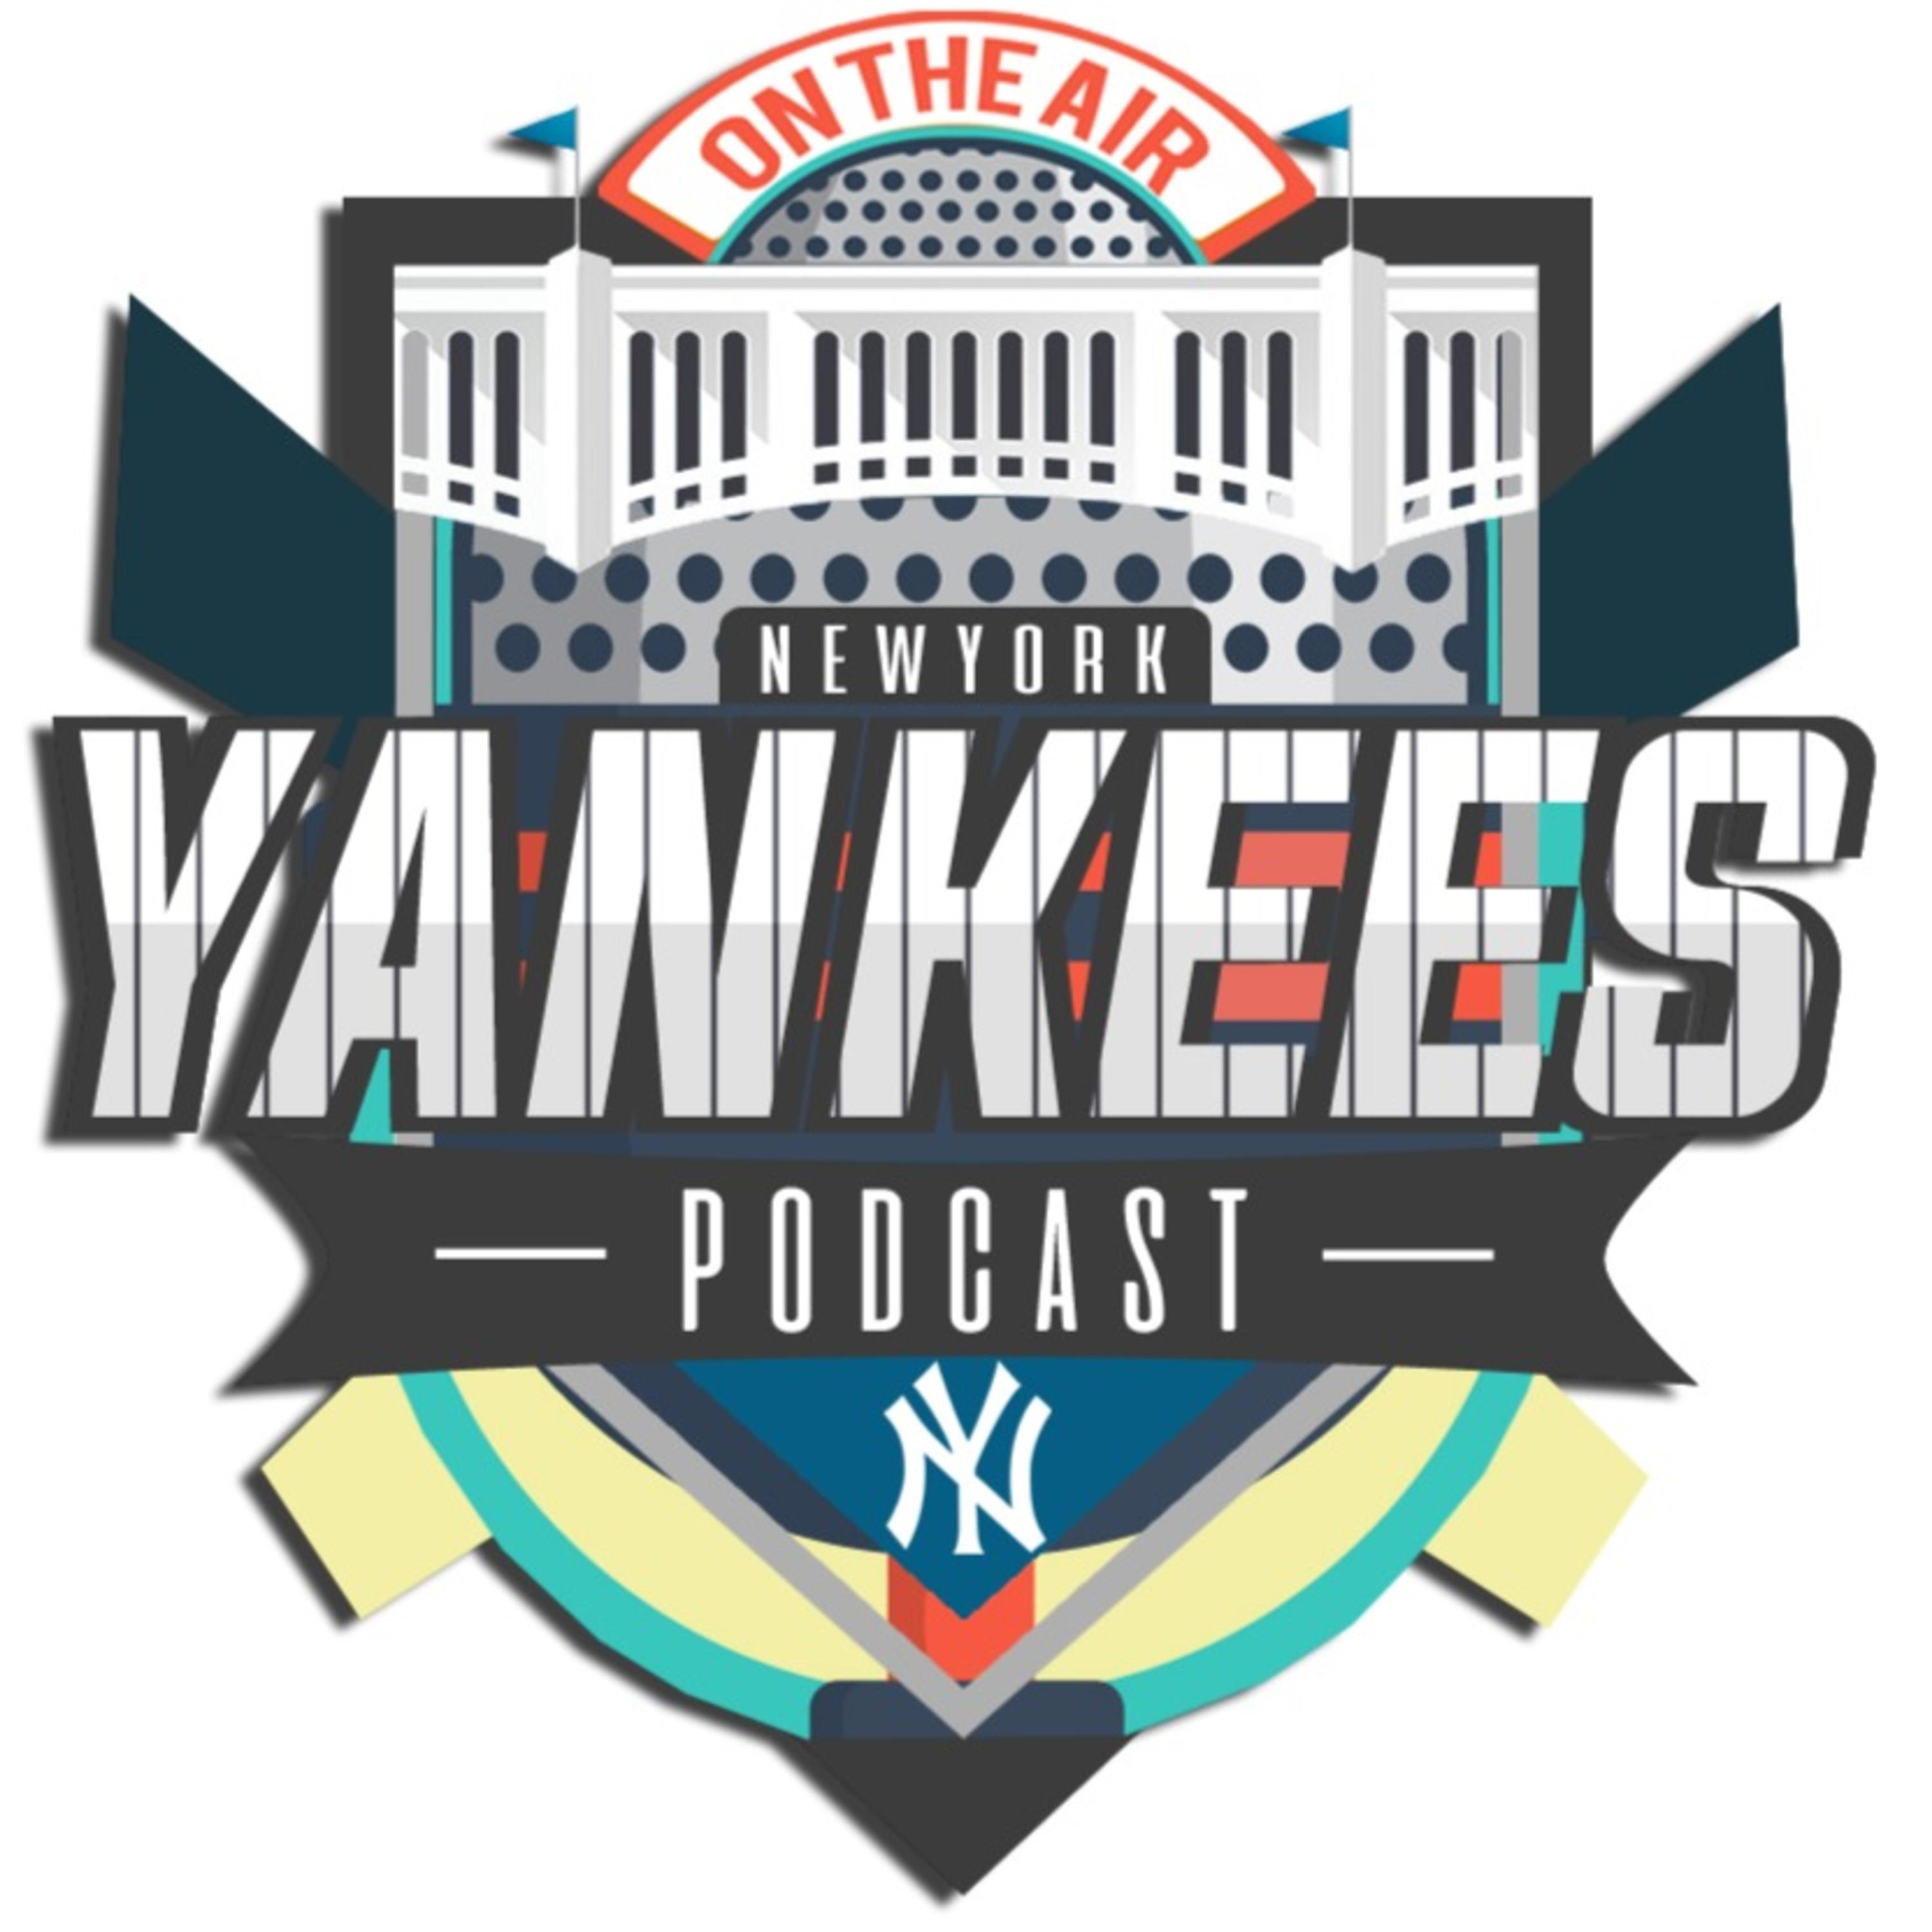 New York Yankees Hungary Podcast - Bé x DS! x Mike - S02EP23 - Yankees - Red Sox Rivalry - Episode 2